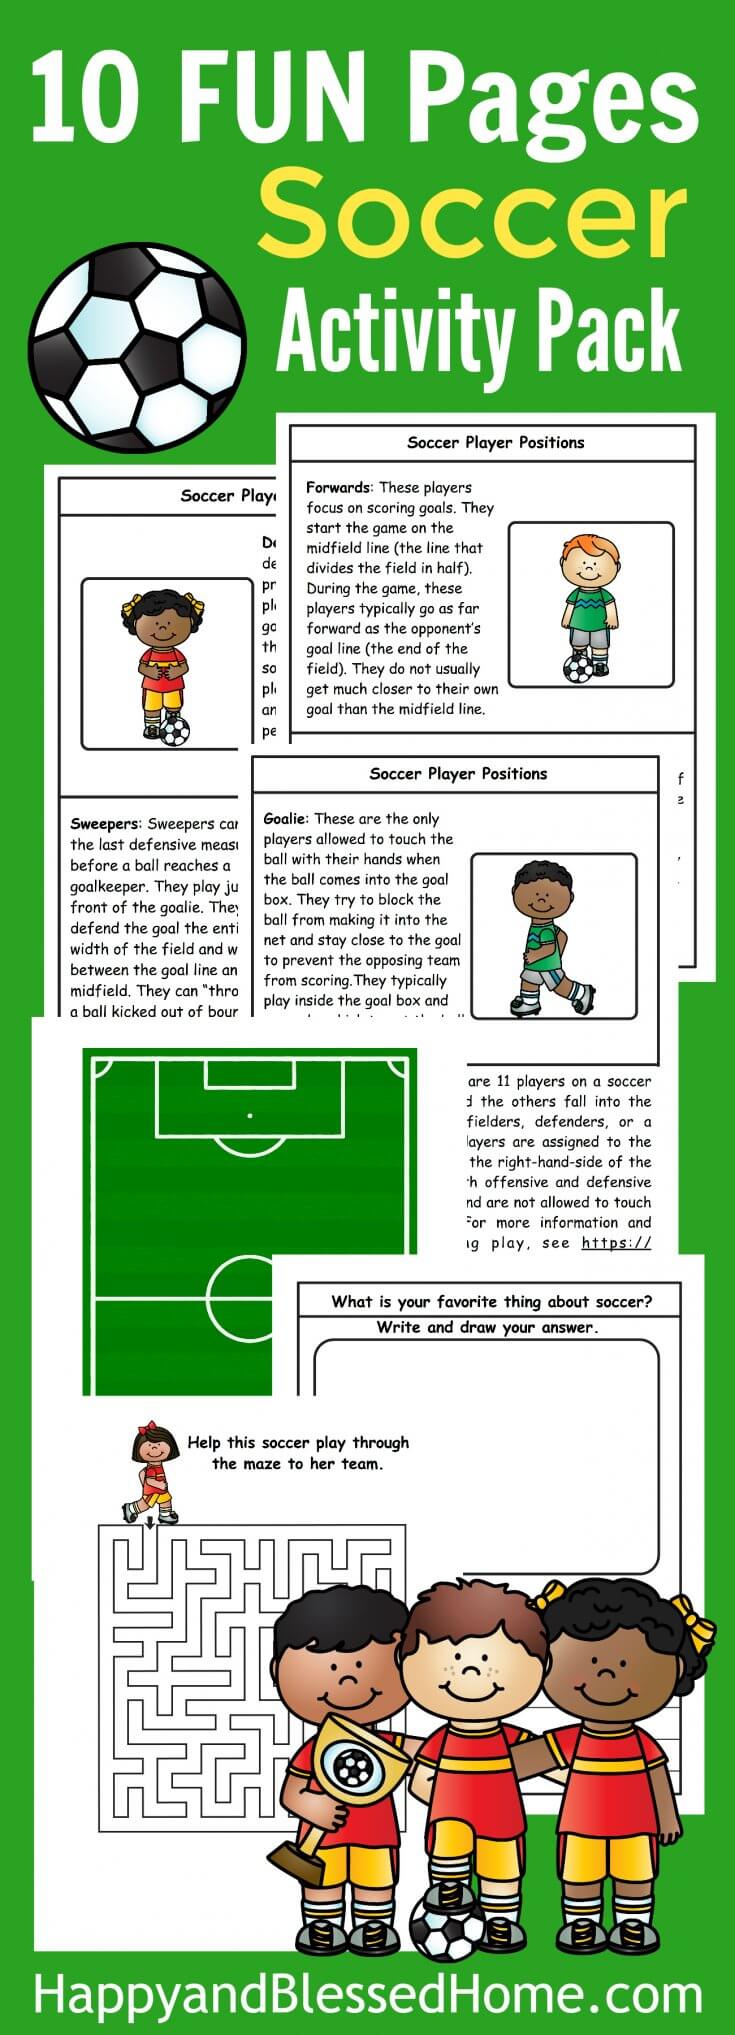 10 FUN Pages Soccer Activity Pack